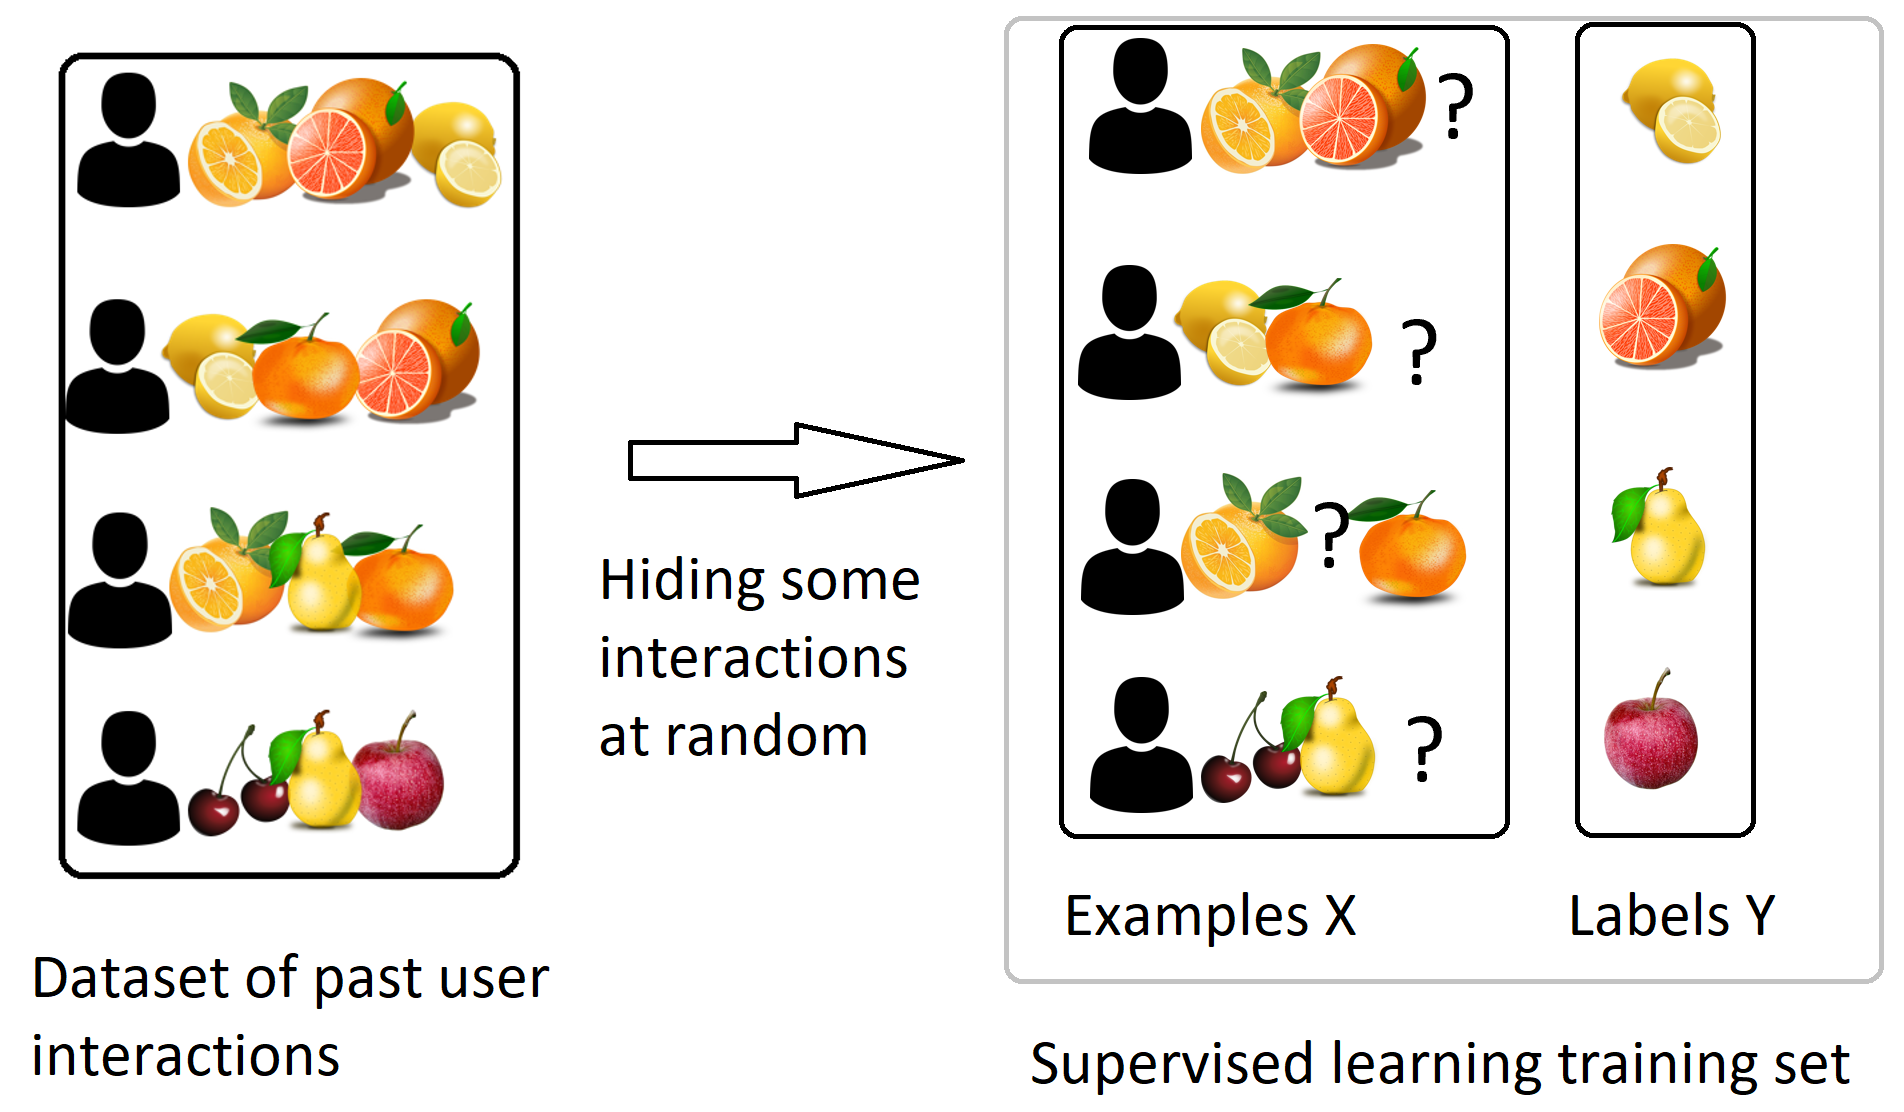 a supervised learning problem